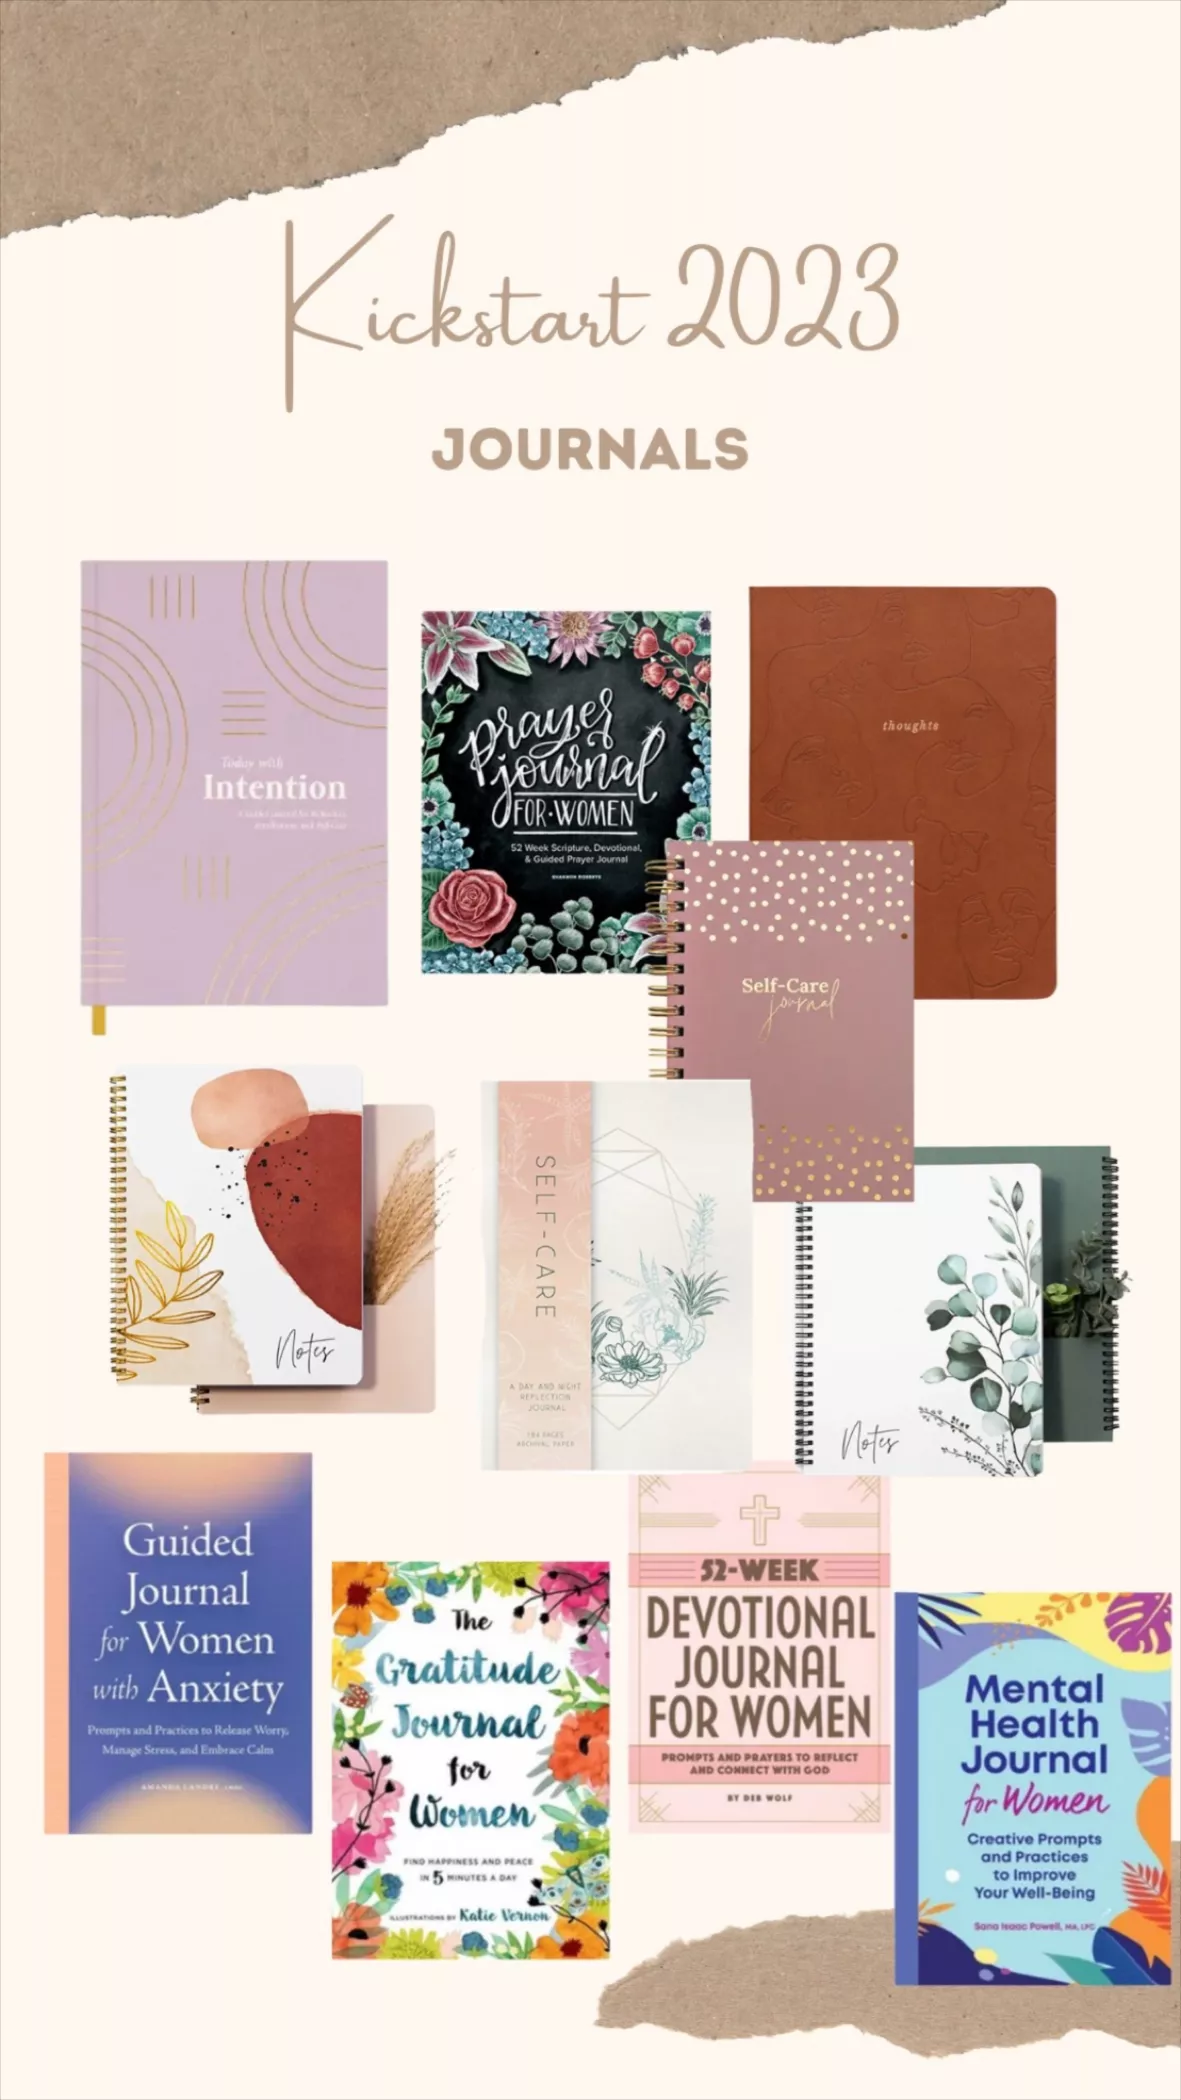 Guided Journal for Women with Anxiety